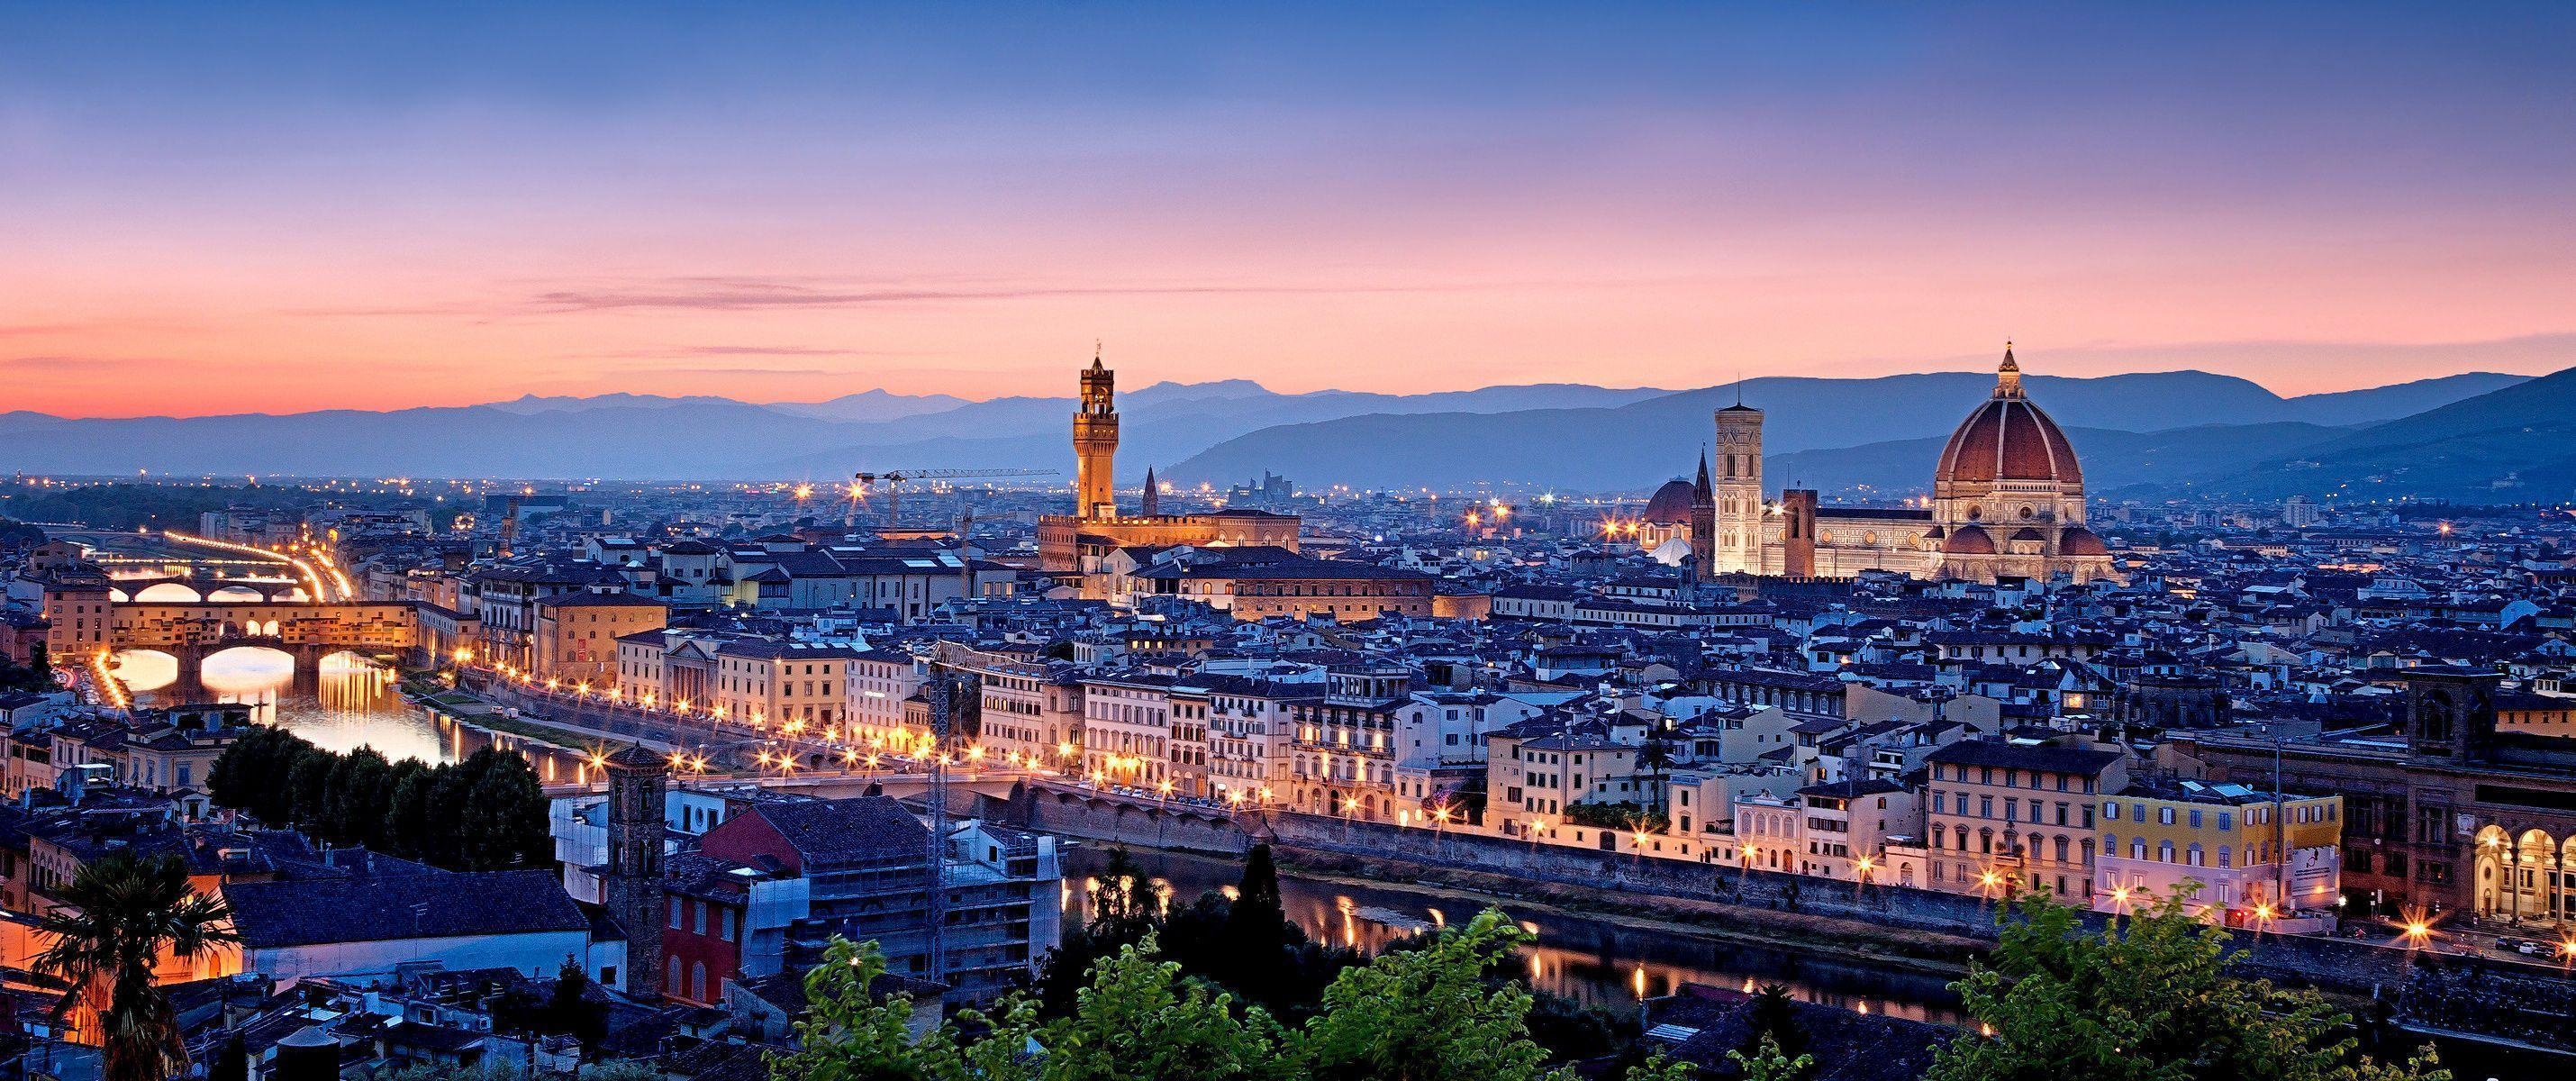 Florence: Firenze, Historic Center, Rose to economic and cultural pre-eminence under the Medici in the 15th and 16th centuries. 2860x1200 Dual Screen Wallpaper.